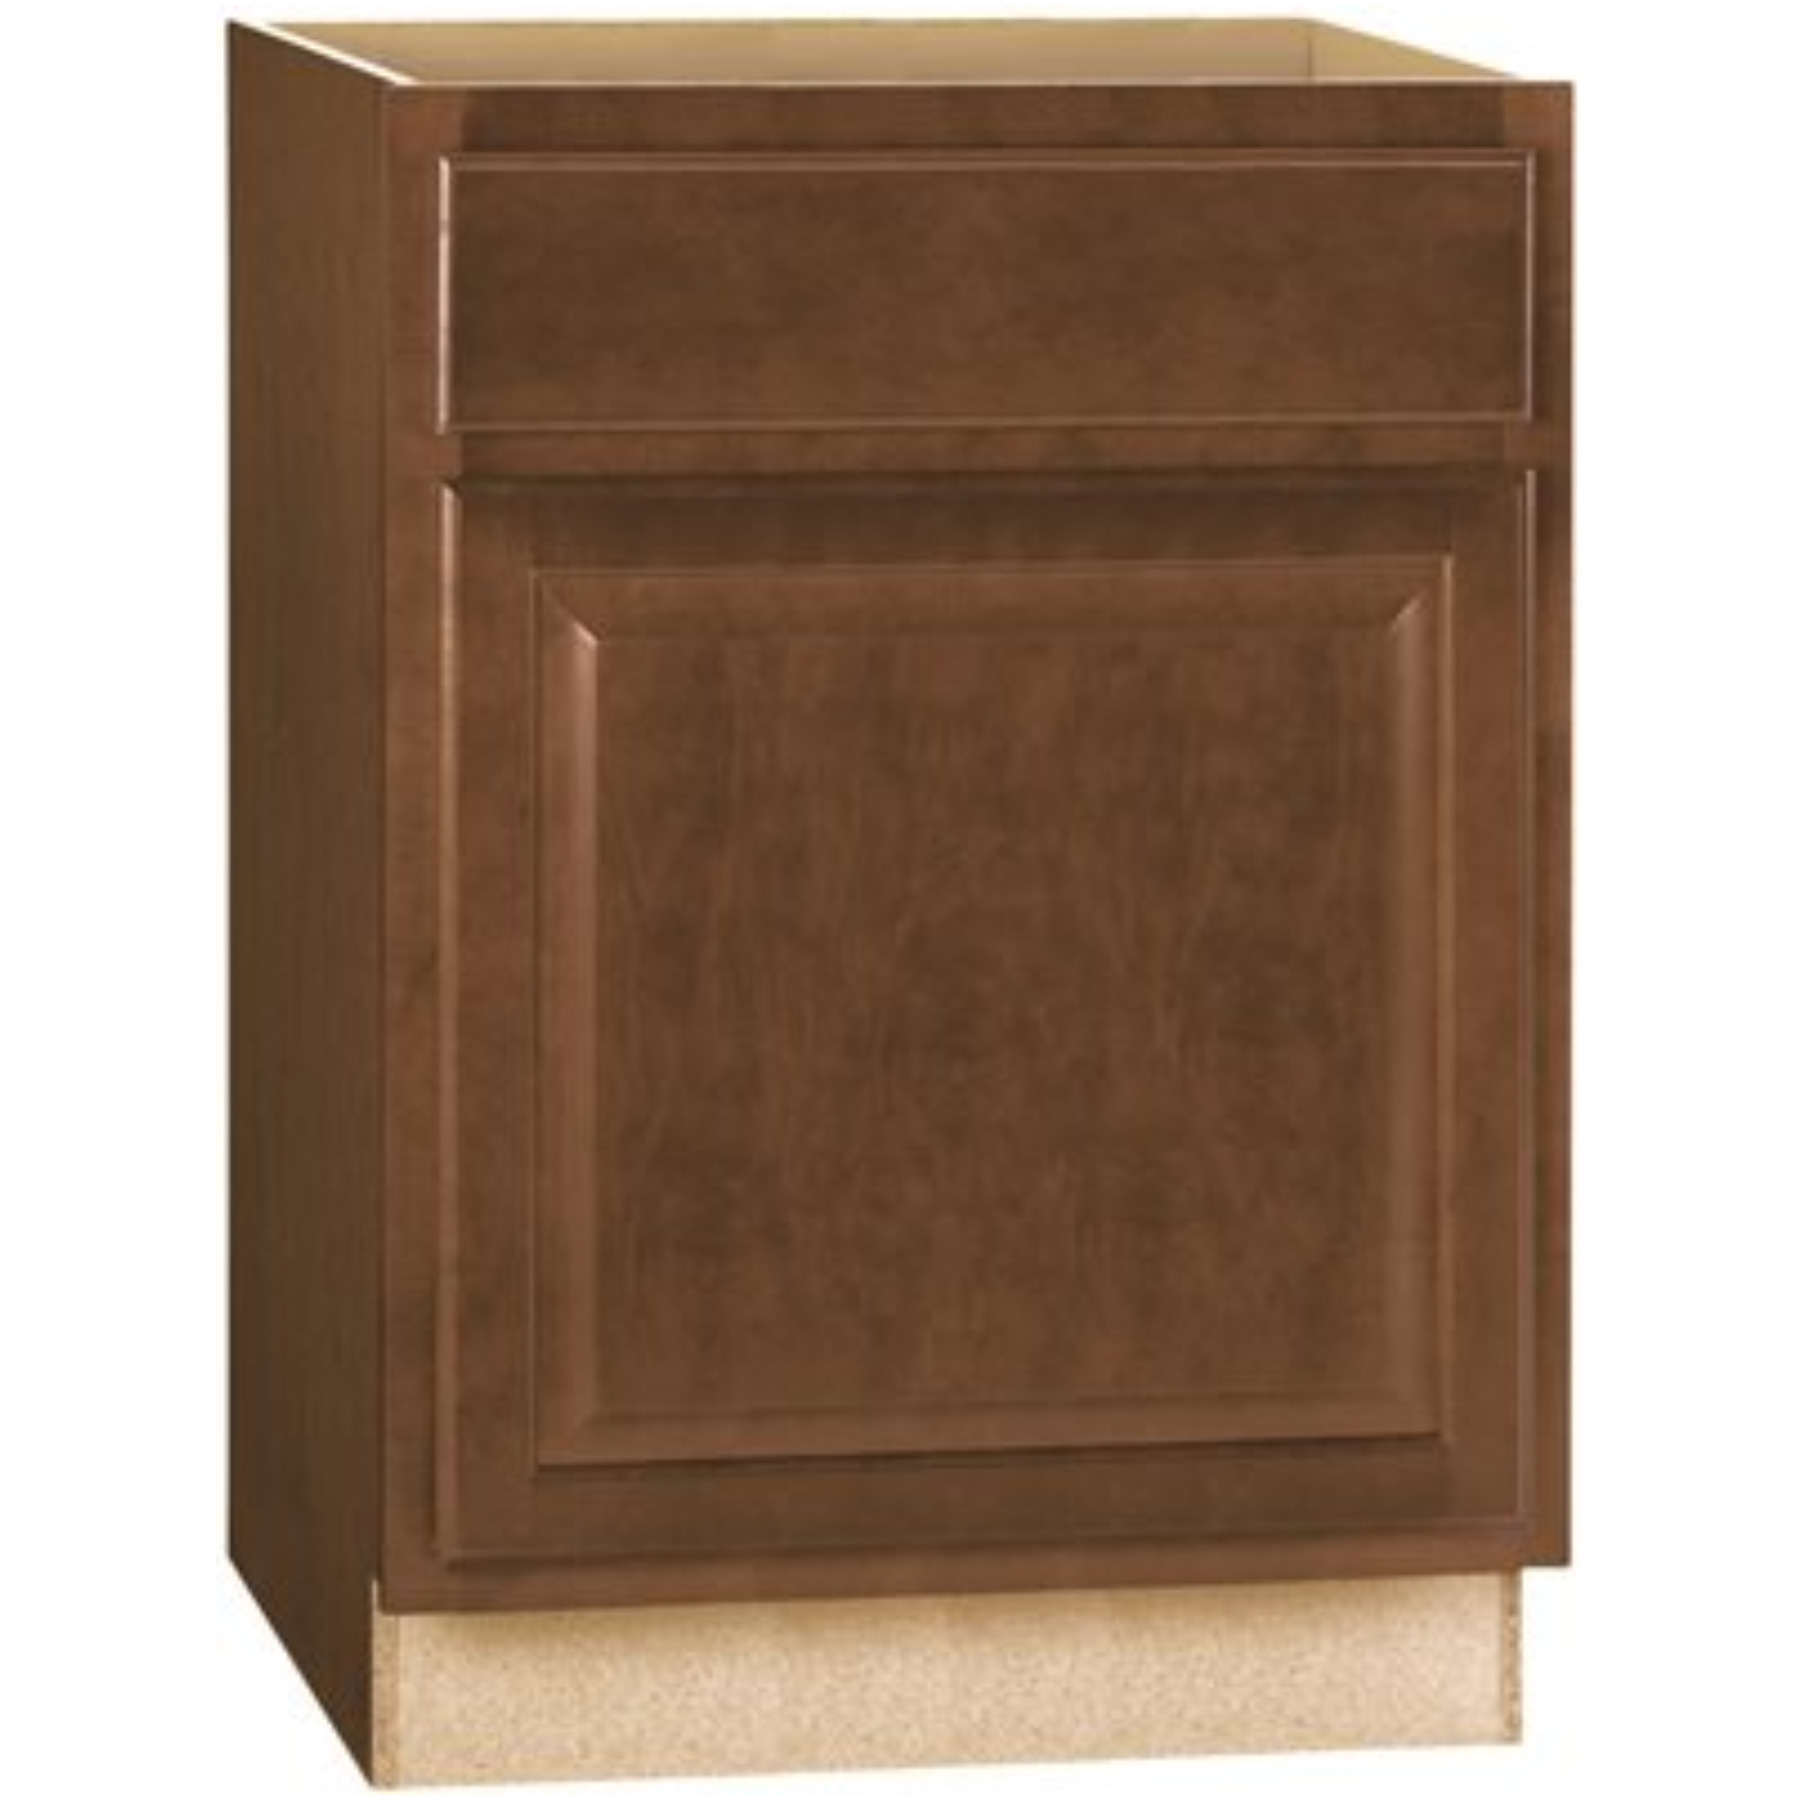 RSI HOME PRODUCTS HAMILTON BASE CABINET, FULLY ASSEMBLED, RAISED PANEL, CAFE, 27X34-1/2X24 IN.